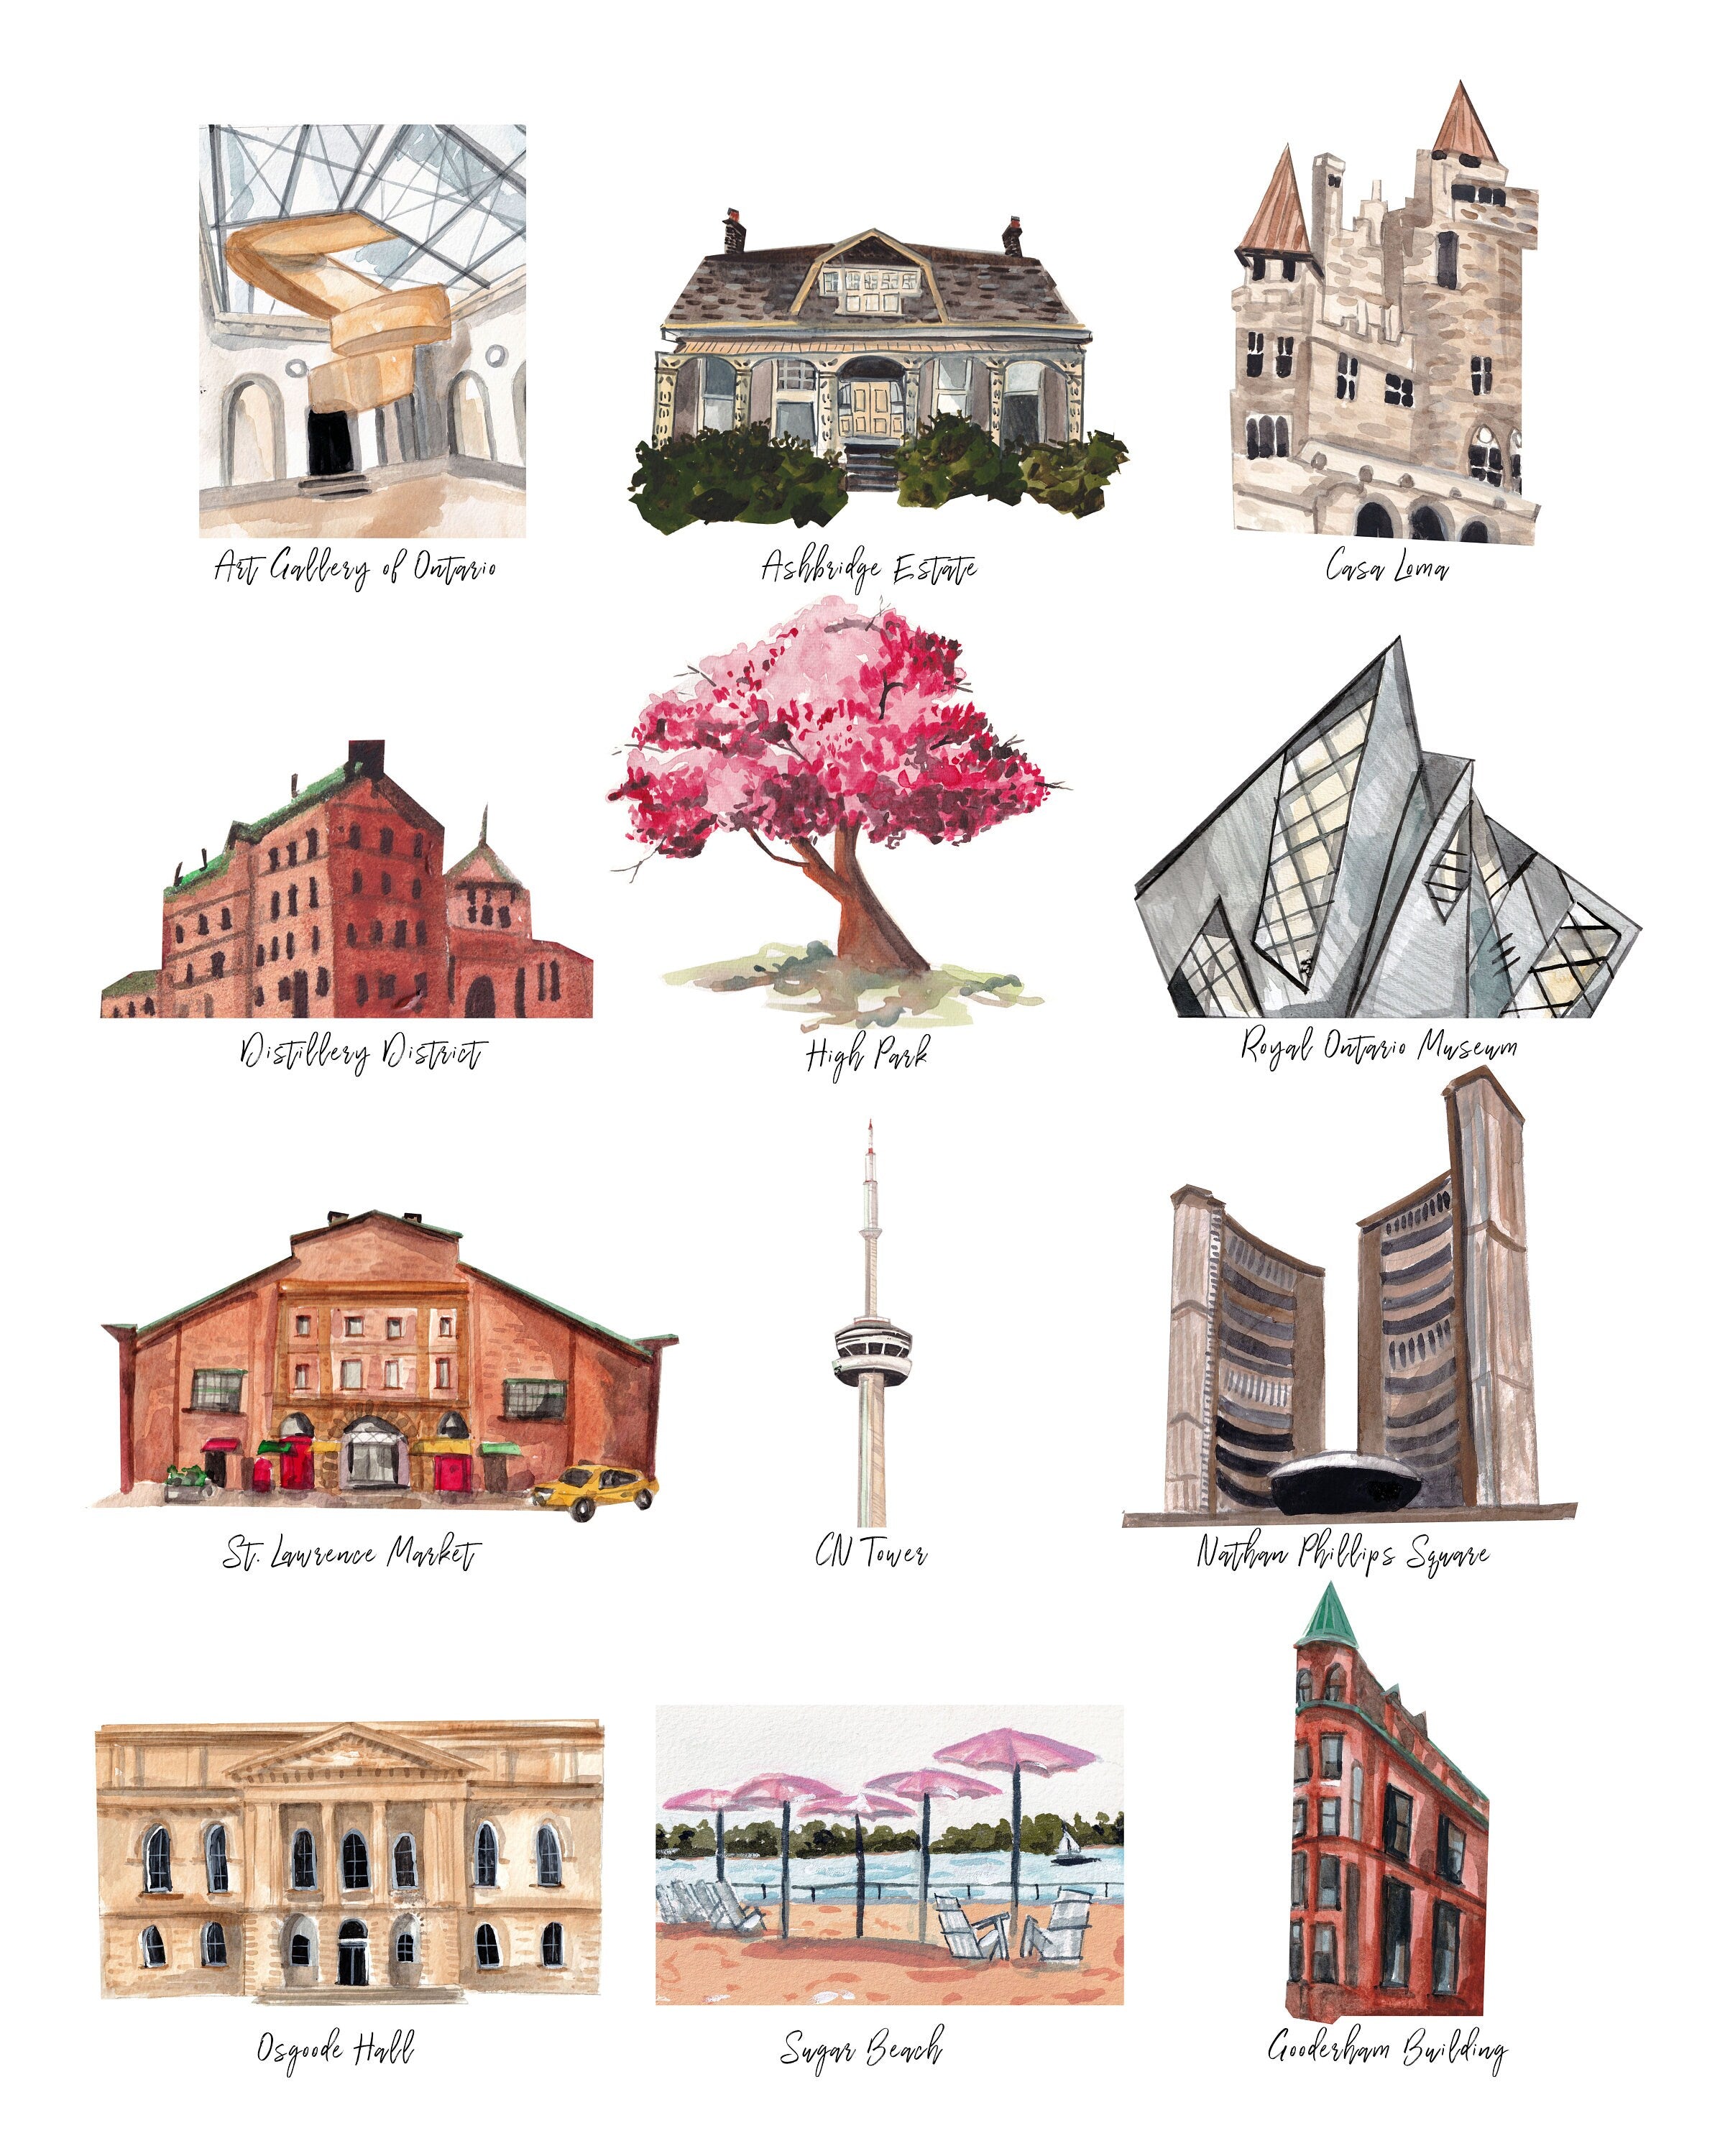 Toronto landmarks print of painting by Medjool Studio. Print of an original gouache painting of 12 notable landmarks in Toronto, Canada, including the Art Gallery of Ontario, High Park, the Distillery District, Casa Loma, the Royal Ontario Museum, St. Lawrence Market, the CN Tower, and more!